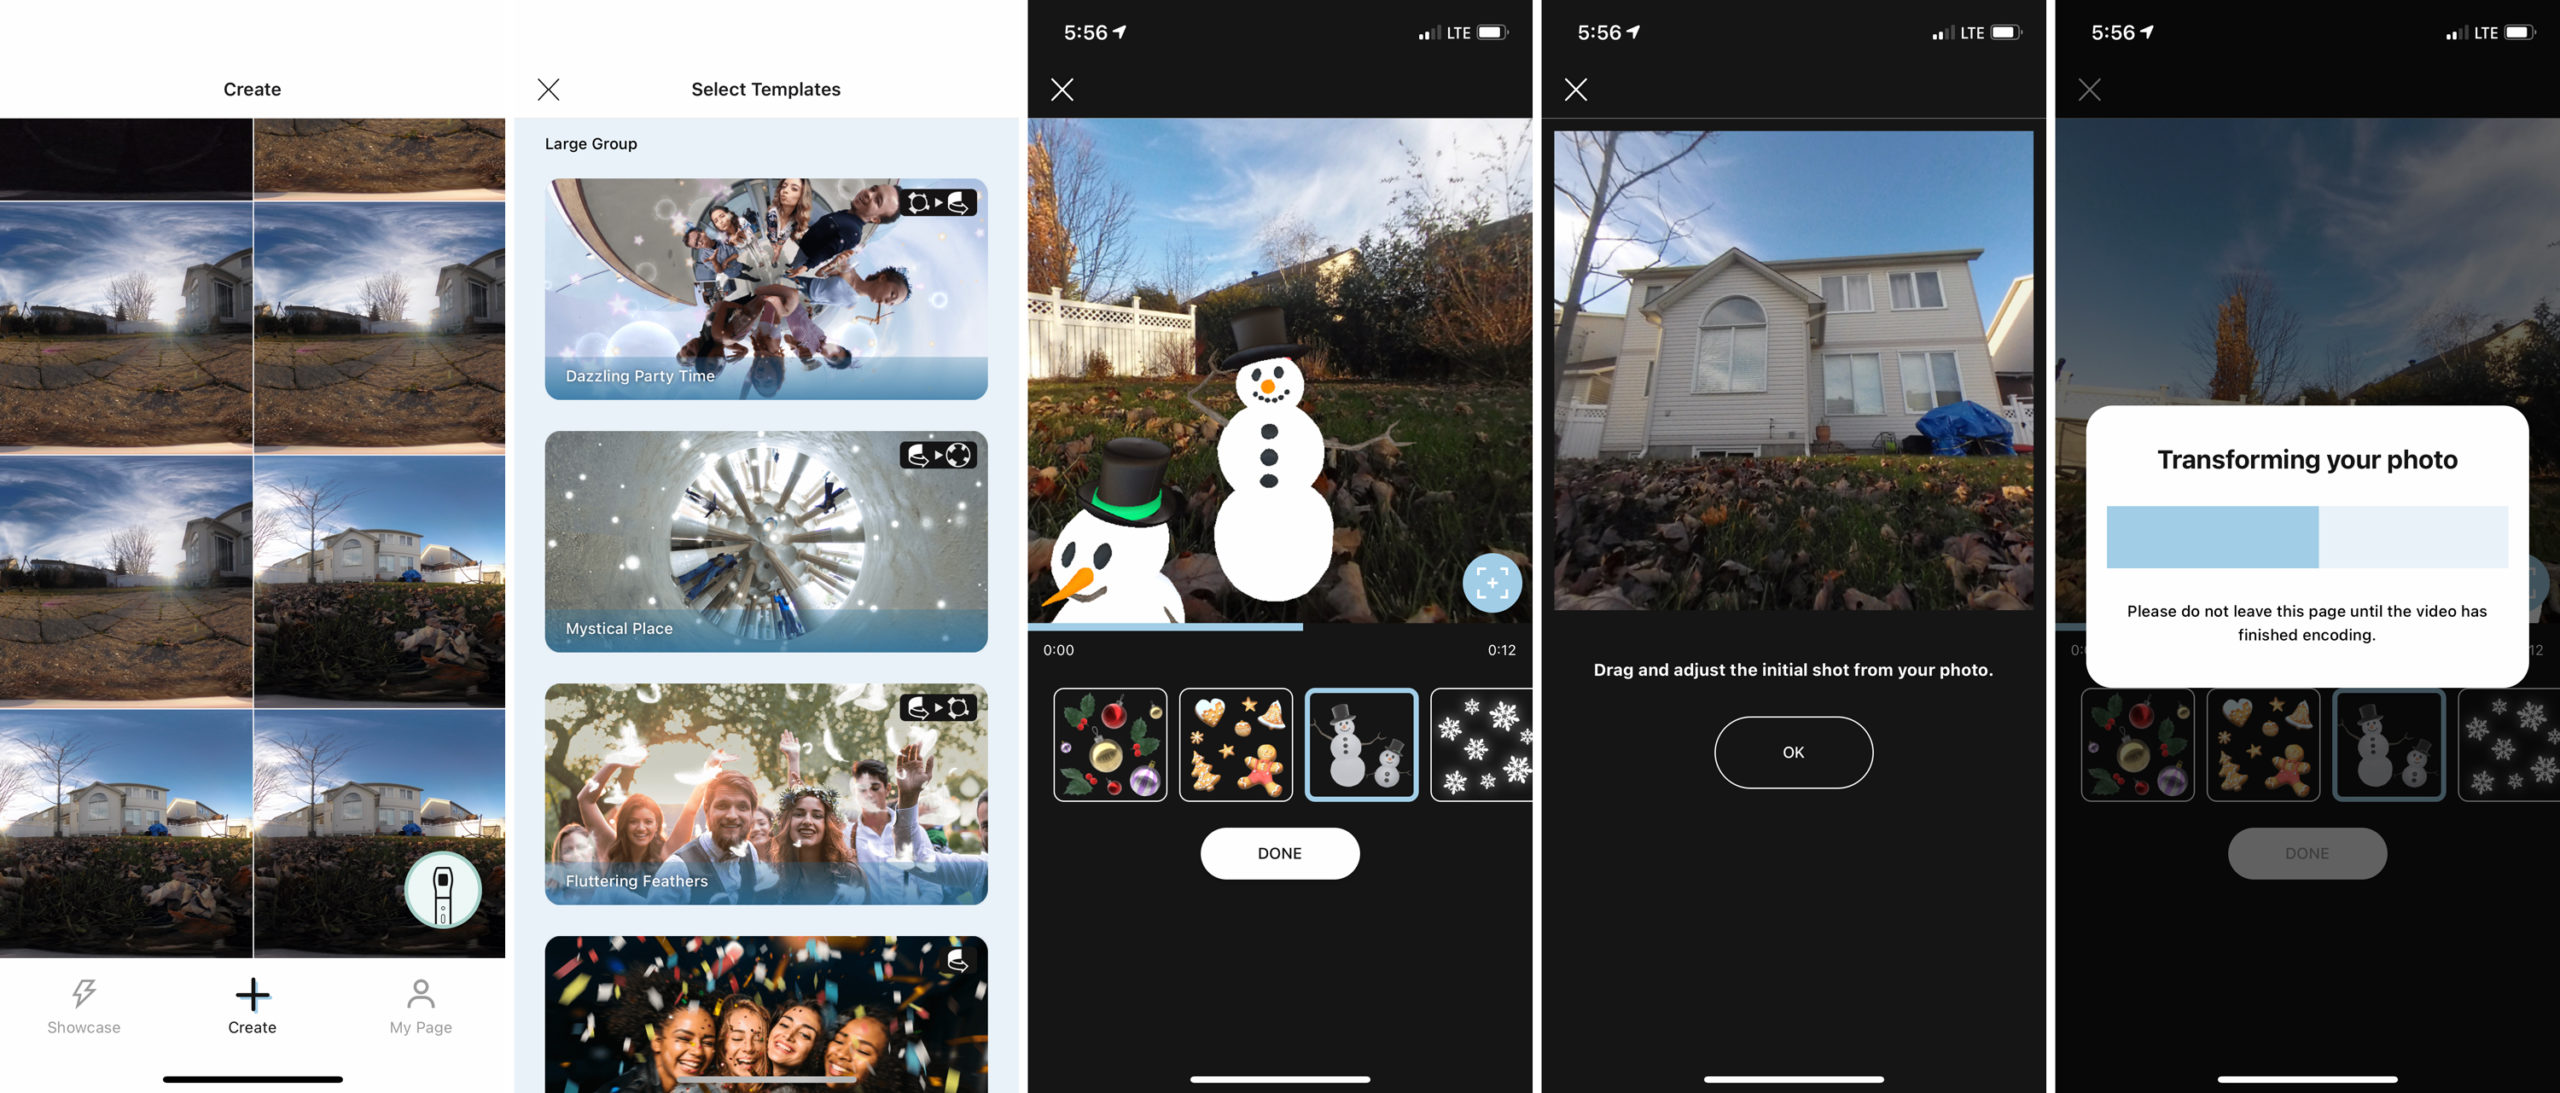 The IQUISPIN app converts 360-degree images into animated videos easy to post on social media, but it could benefit from more customizability, even if it's targeted at the average consumer. (Screenshot: Andrew Liszewski / Gizmodo)